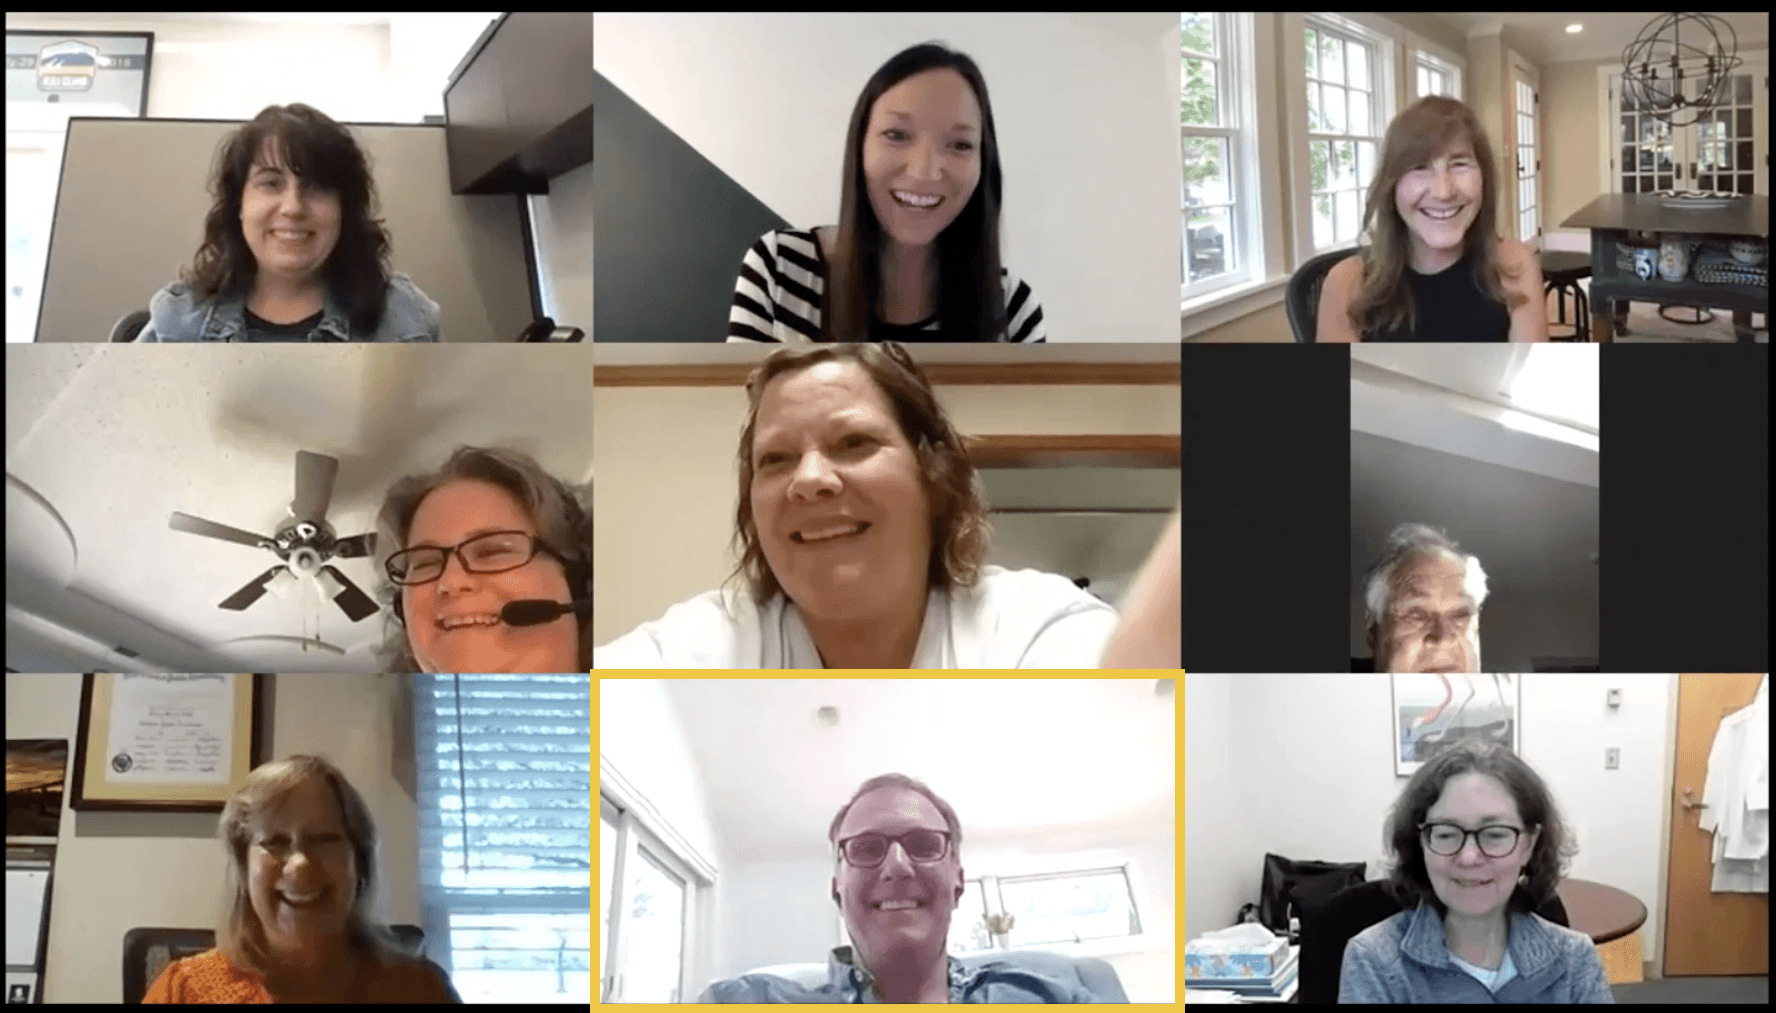 A screenshot of a Zoom meeting shows Mark Dunning, Foresight Award recipient, in the bottom center of the grid. Eight other people are shown smiling and laughing, from left to right: Lane McKittrick, Krista Vasi, Nancy Corderman, Kathy Thompson, Danay Tre